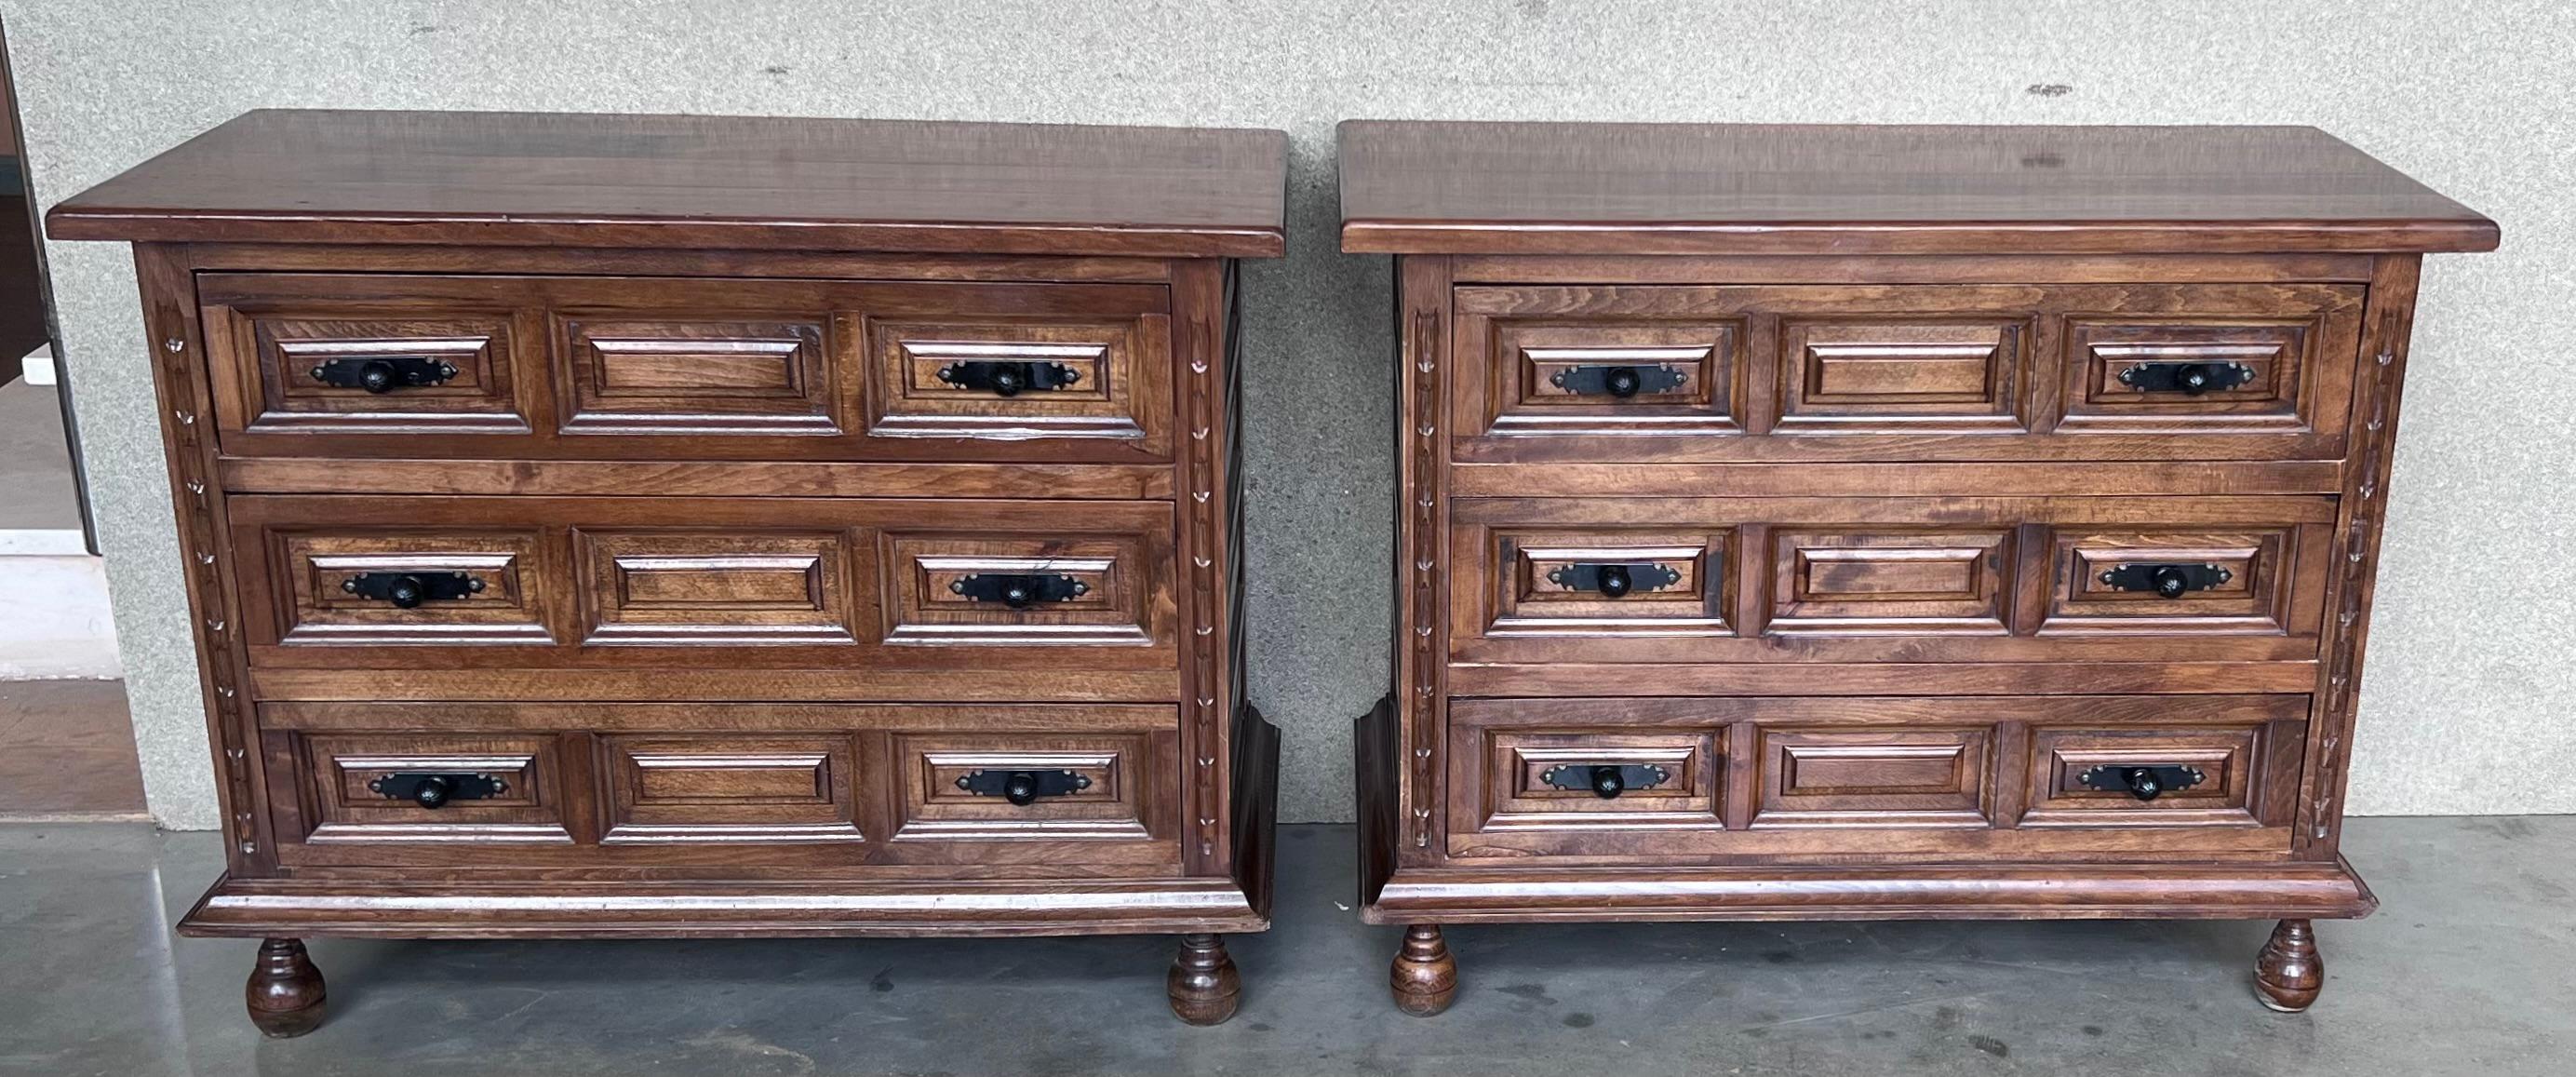 Spanish Colonial 19th Catalan Spanish Baroque Carved Walnut Tuscan Two Drawers Chest of Drawers